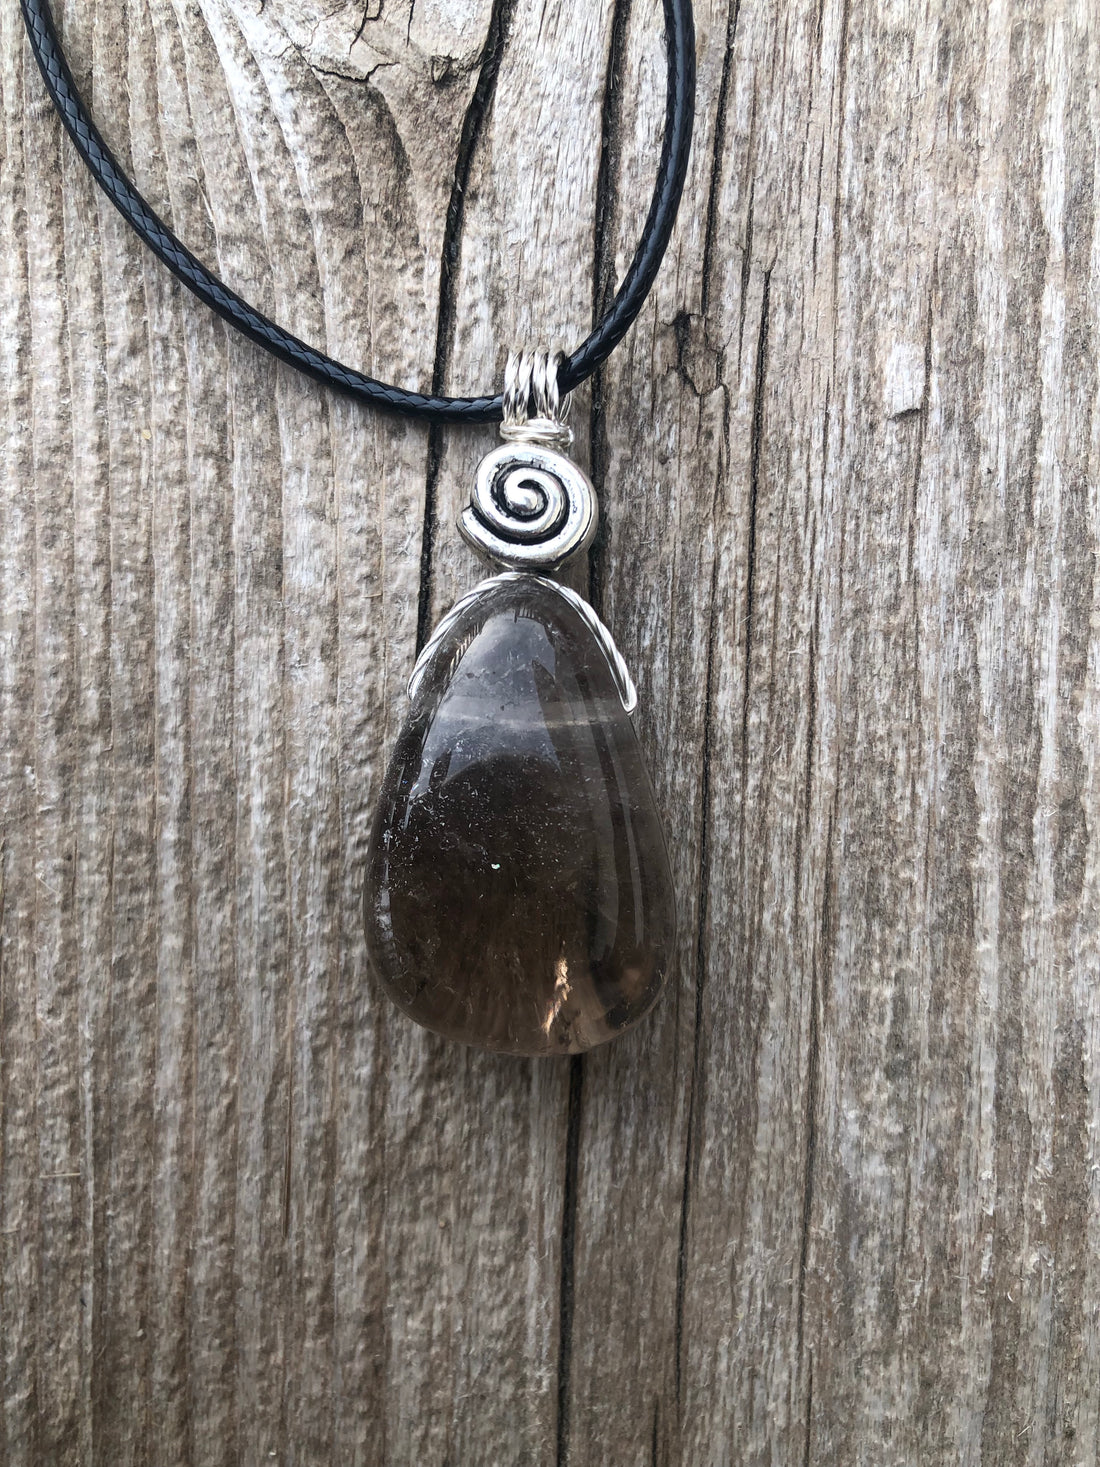 Smoky Quartz Necklace Great for Protection and Intuition. Swirl for Higher Consciousness.